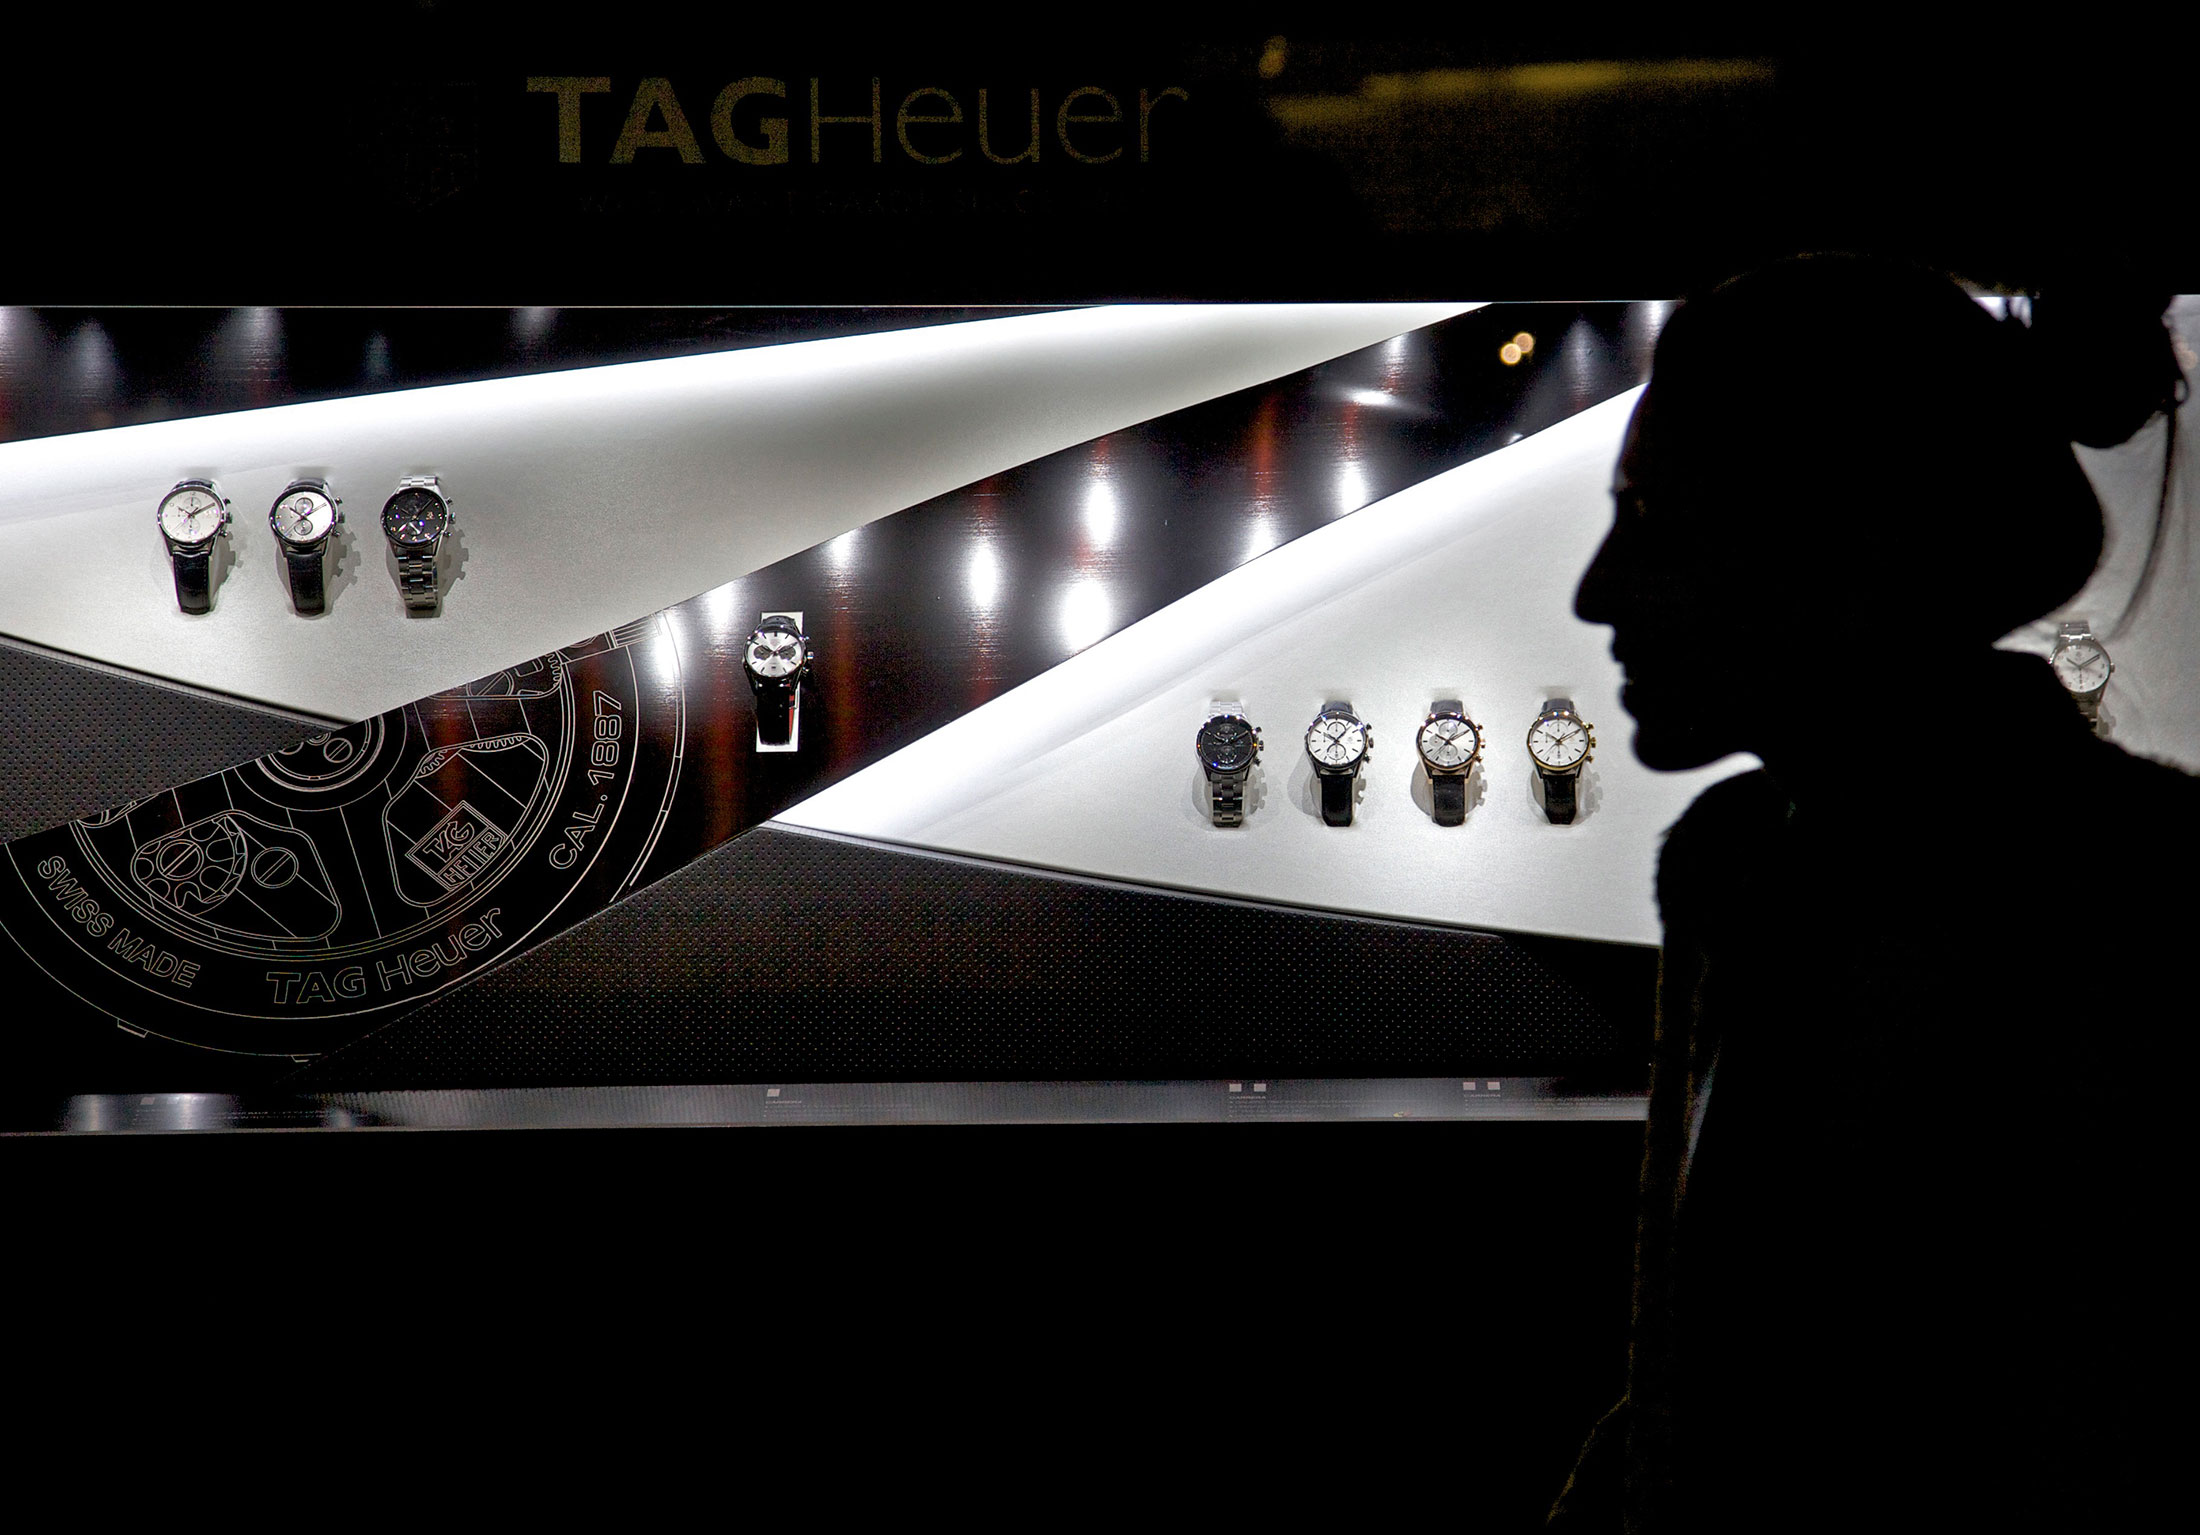 A display of Tag Heuer wristwatches, the Swiss watchmaker owned by LVMH Moet Hennessy Louis Vuitton SA, during the Baselworld watch fair in Switzerland.
